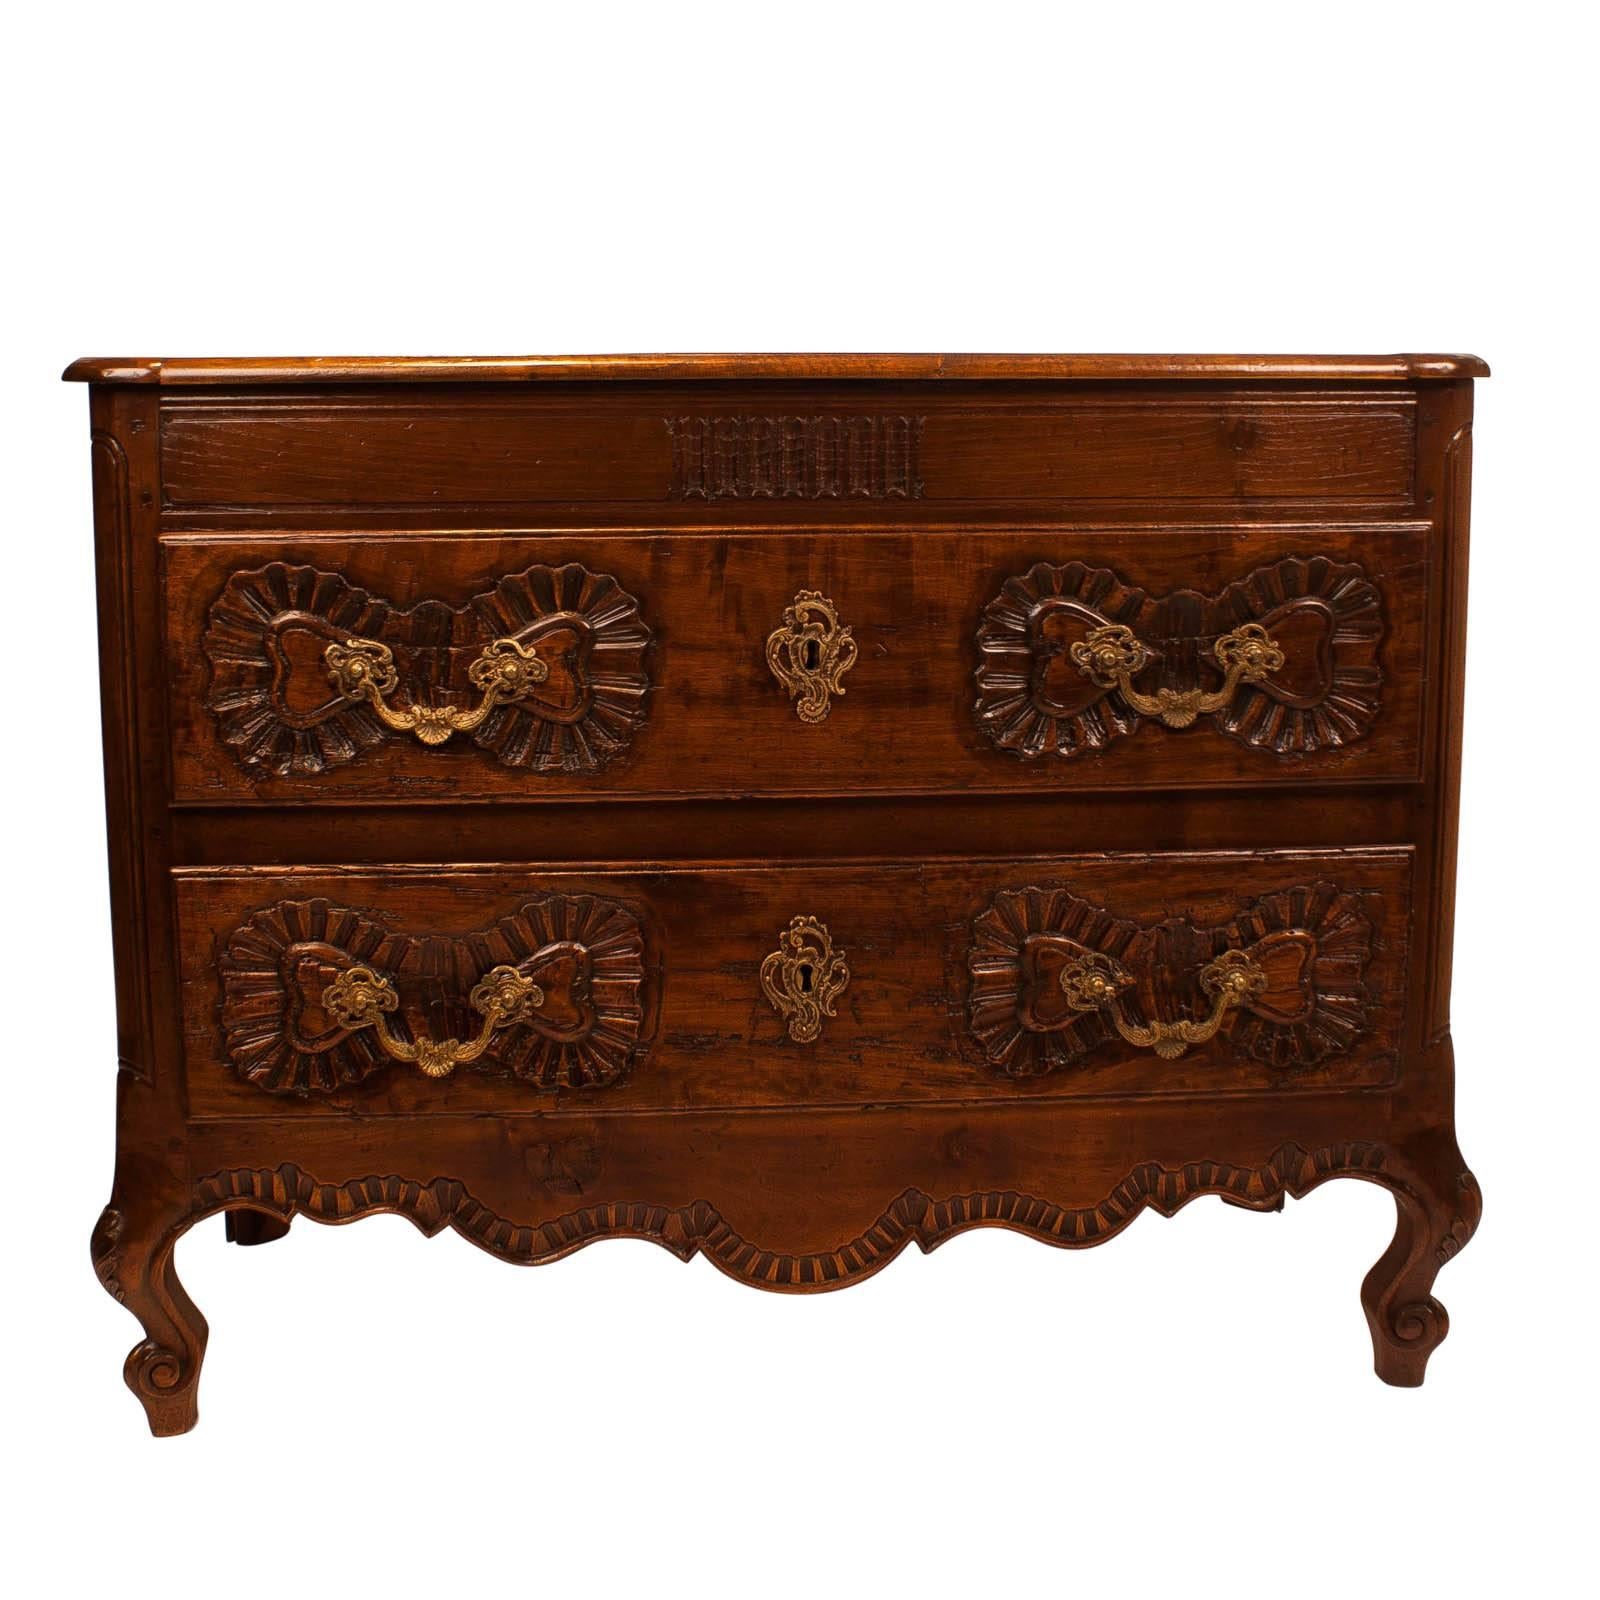 A good smaller scale walnut two-drawer chest made in Spain or Portugal circa 1840. The size and bold decoration are particularly nice. Collected in Northern Spain, circa 1950. Drawers work well. Recently professionally tightened and polished.